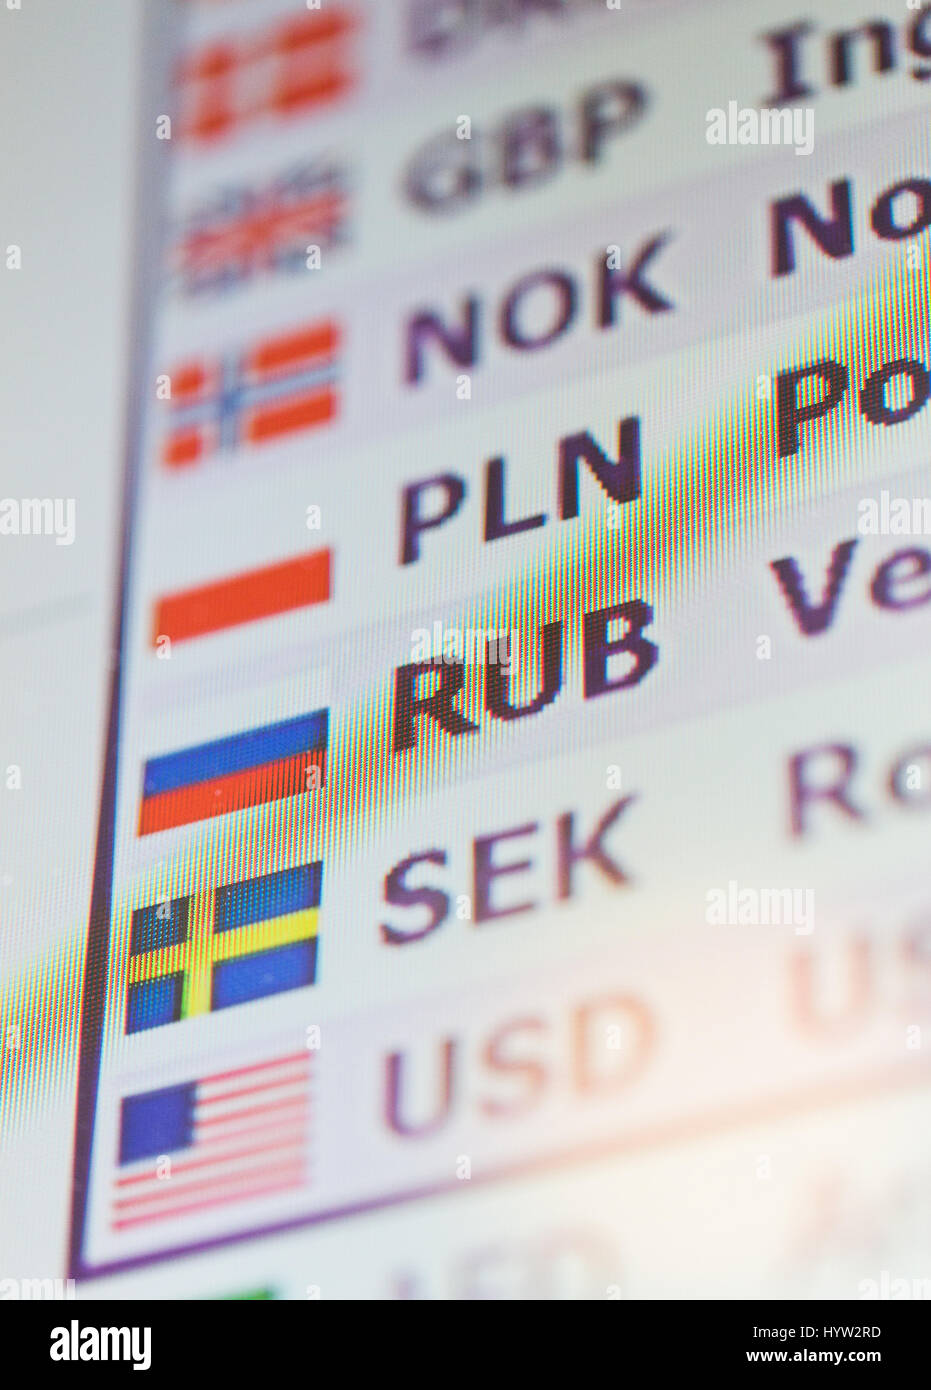 digital display with currency exchange rates Stock Photo